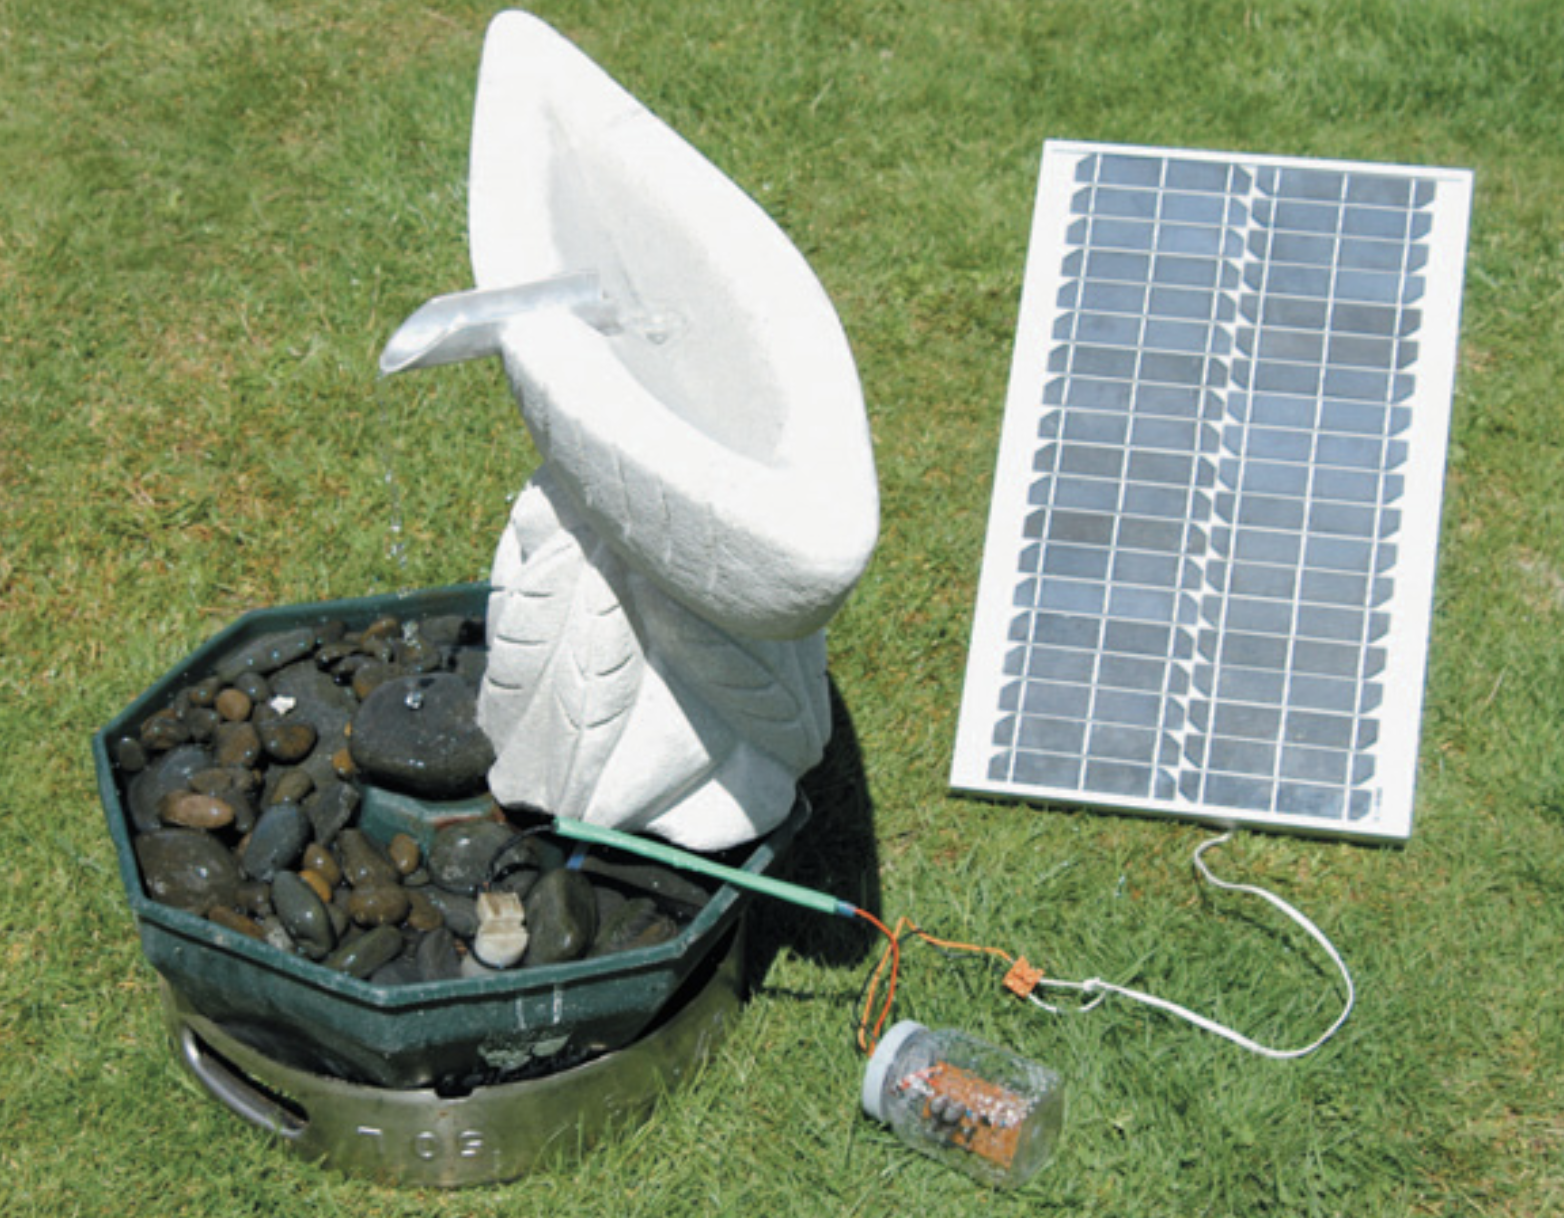 Solar-powered water feature. Note the half-submerged windscreen washer pump.